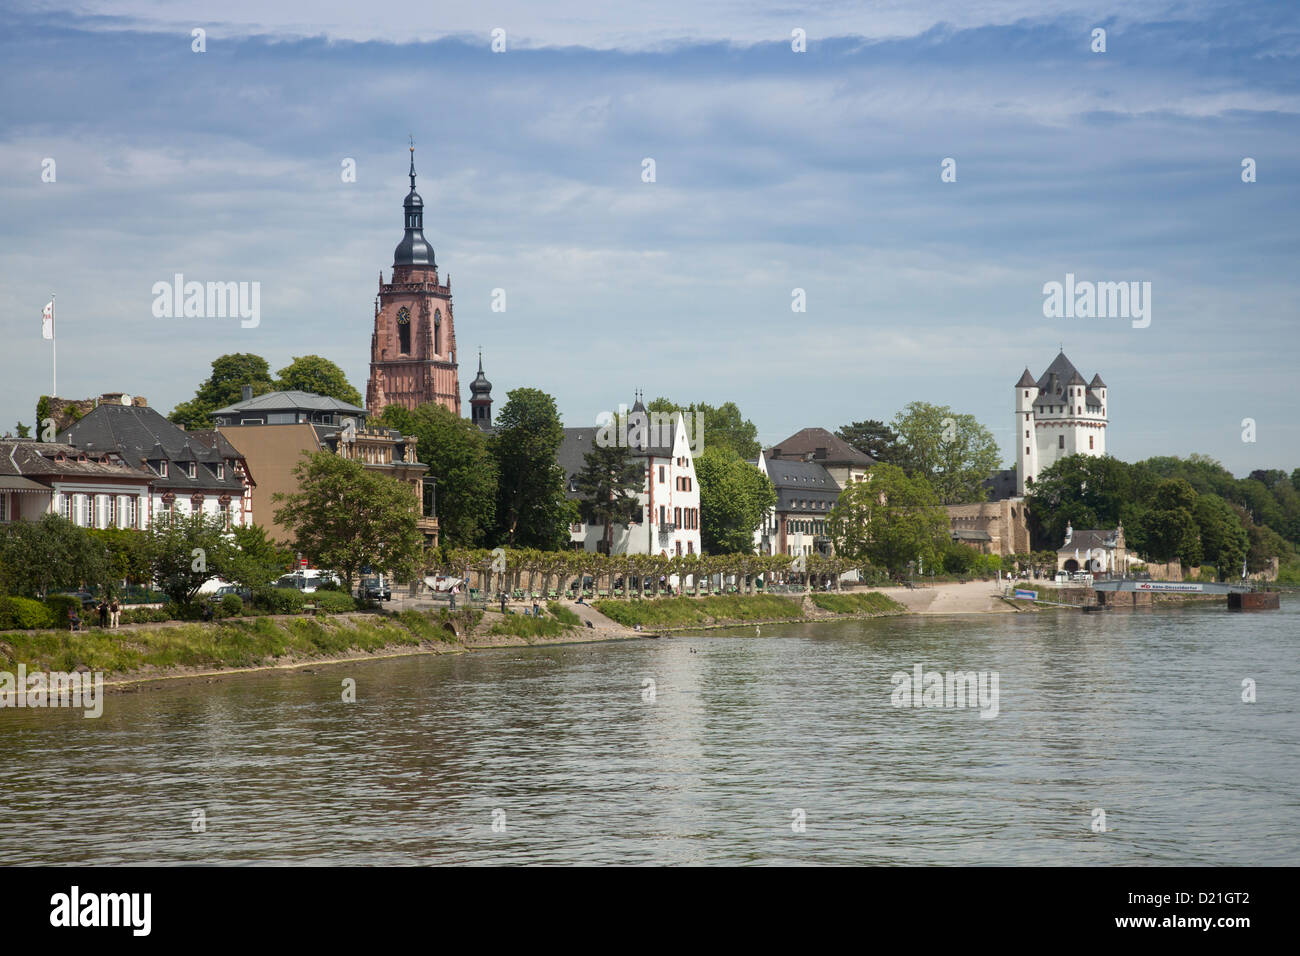 View of Rhine river and town of Eltville am Rhein, Hesse, Germany, Europe Stock Photo